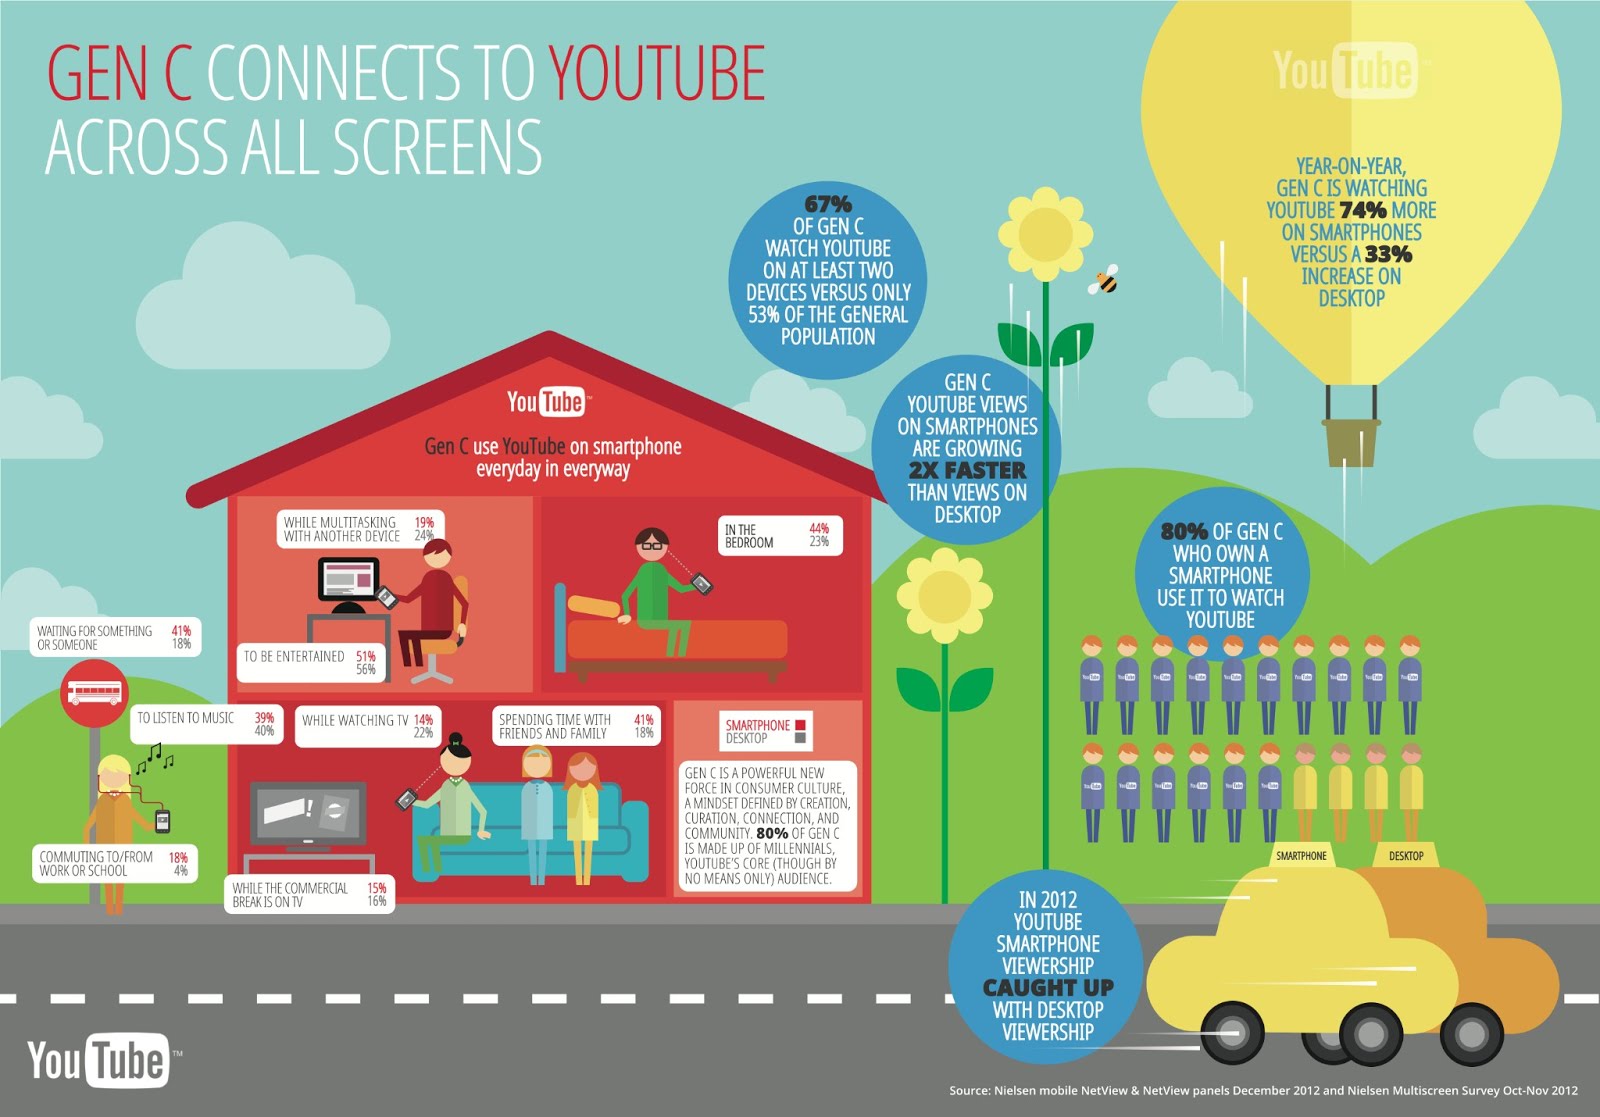 gen-c-connects-on-all-screens-on-youtube-infographic-copy